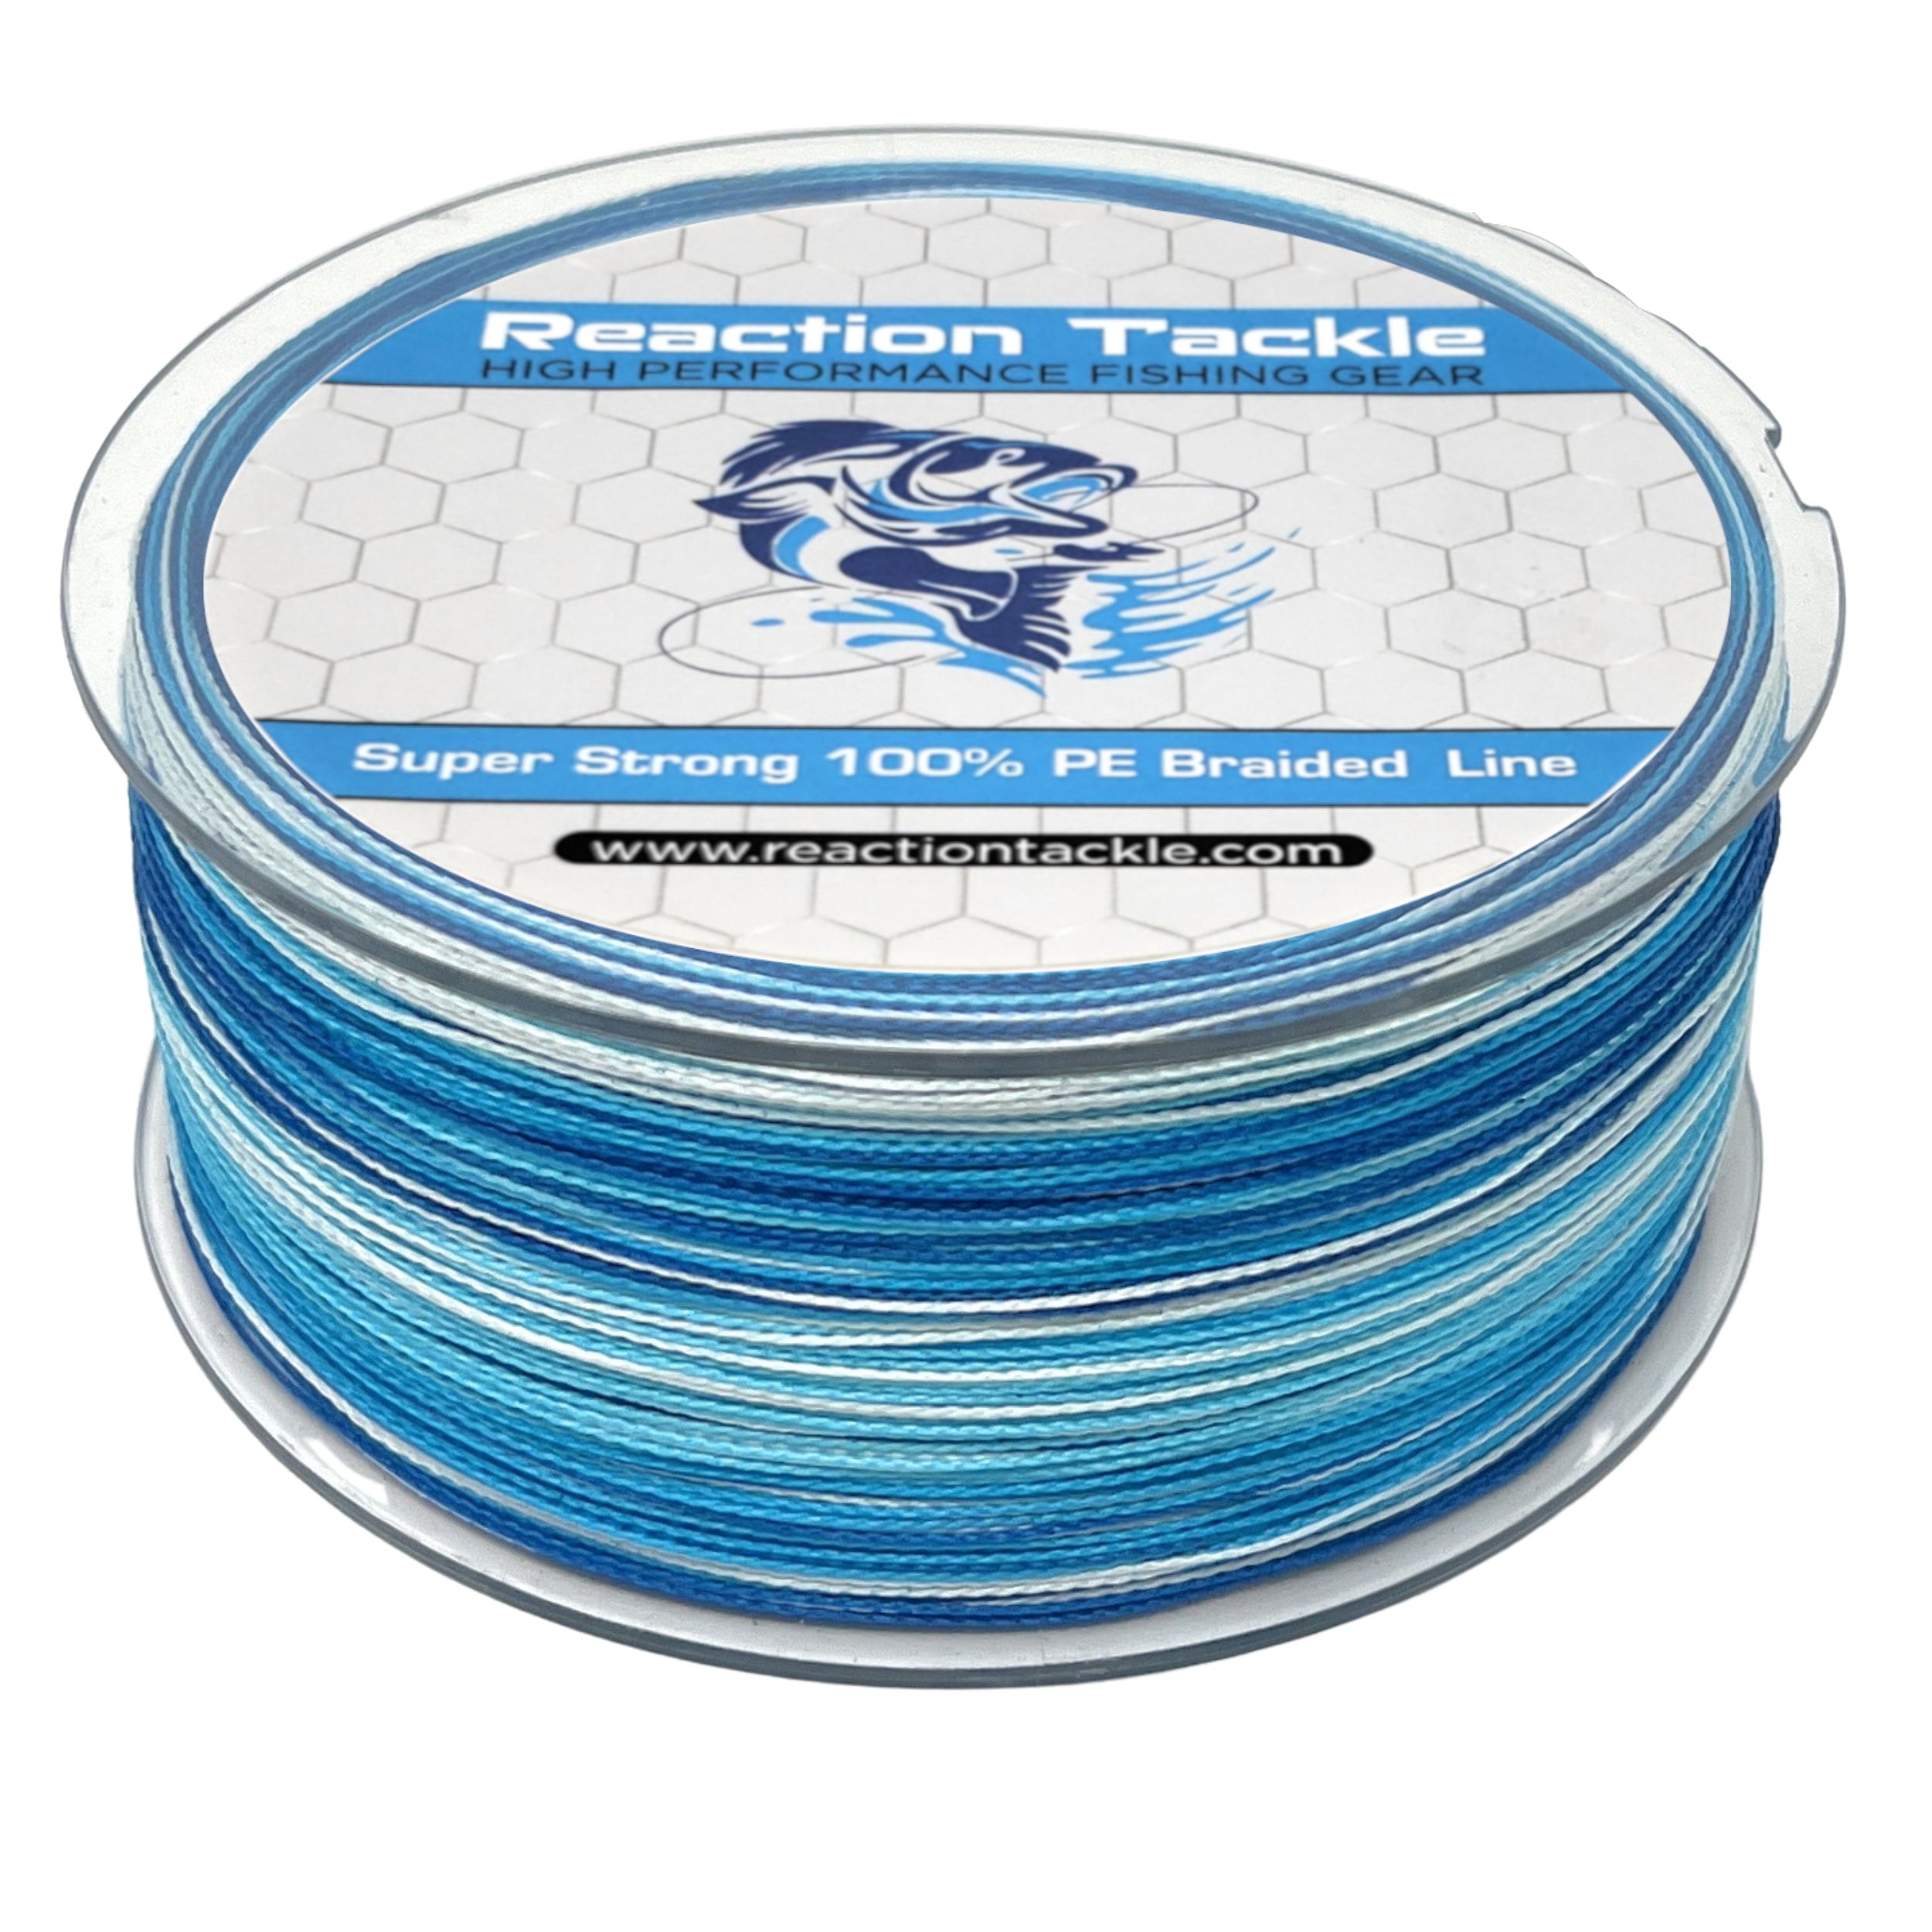 GetUSCart- Reaction Tackle Braided Fishing Line - 8 Strand Blue Camo 150LB  1000yd